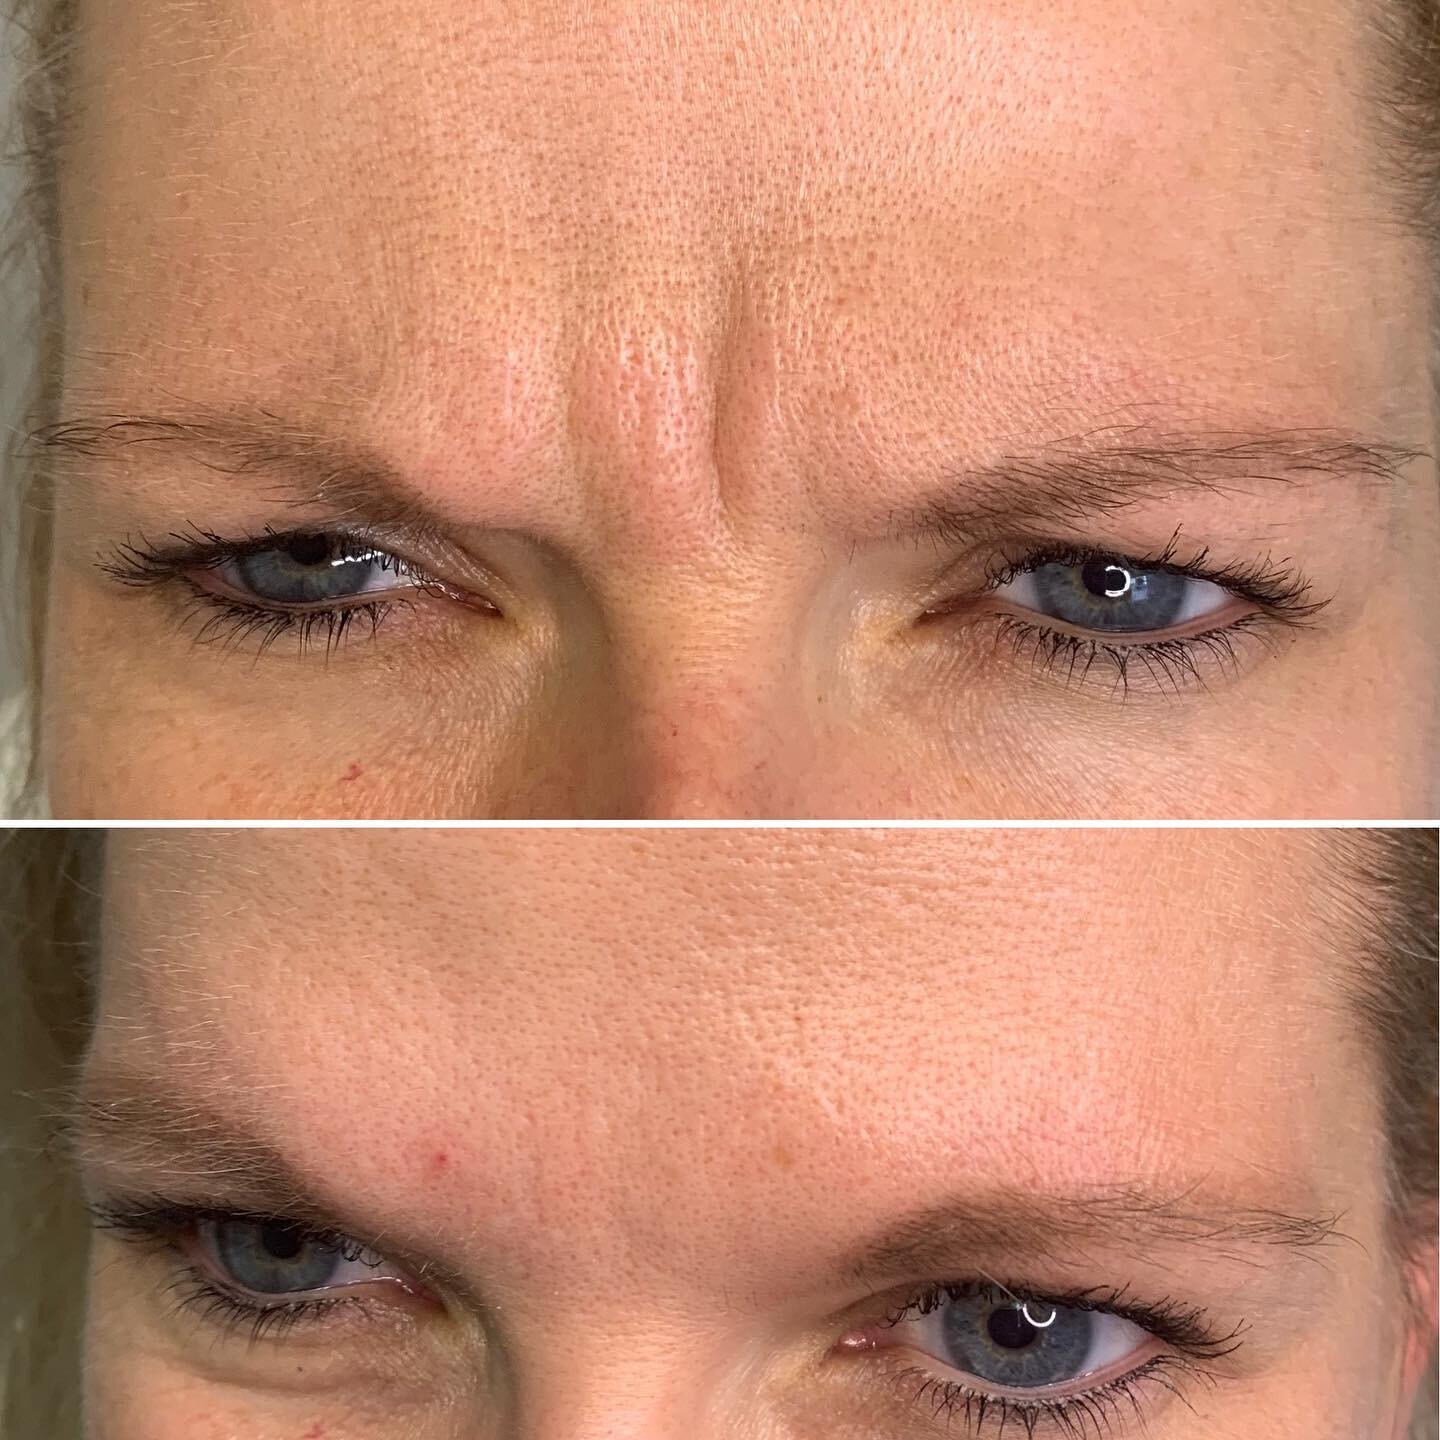 Microneedling with PRF will help improve texture, fine lines, firmness, discoloration and diminish pore size since it increases collagen and skin elasticity.  Adding a bit of Botox will help prevent any etched in lines long term.  #botox #watervillem